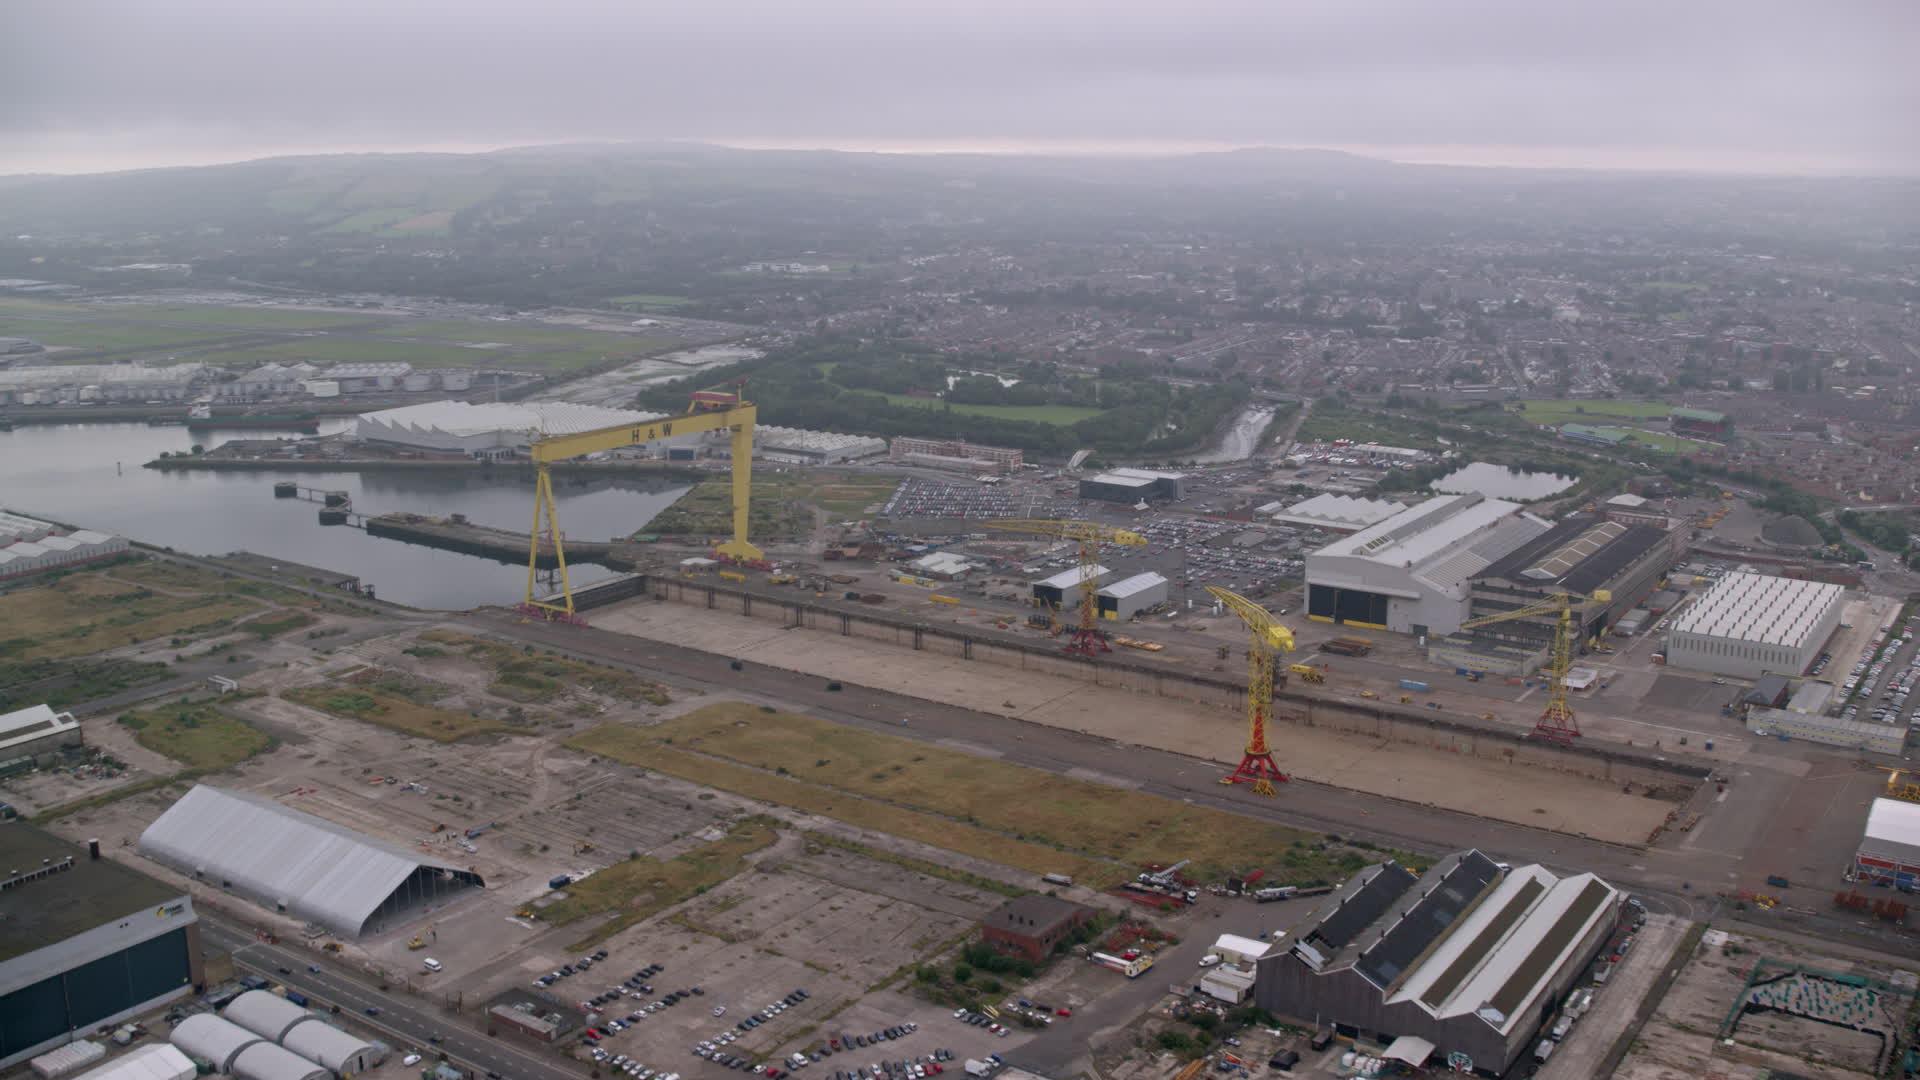 6K stock footage aerial video of cranes at the Port of Belfast, Northern Ireland Aerial Stock Footage AX113_120